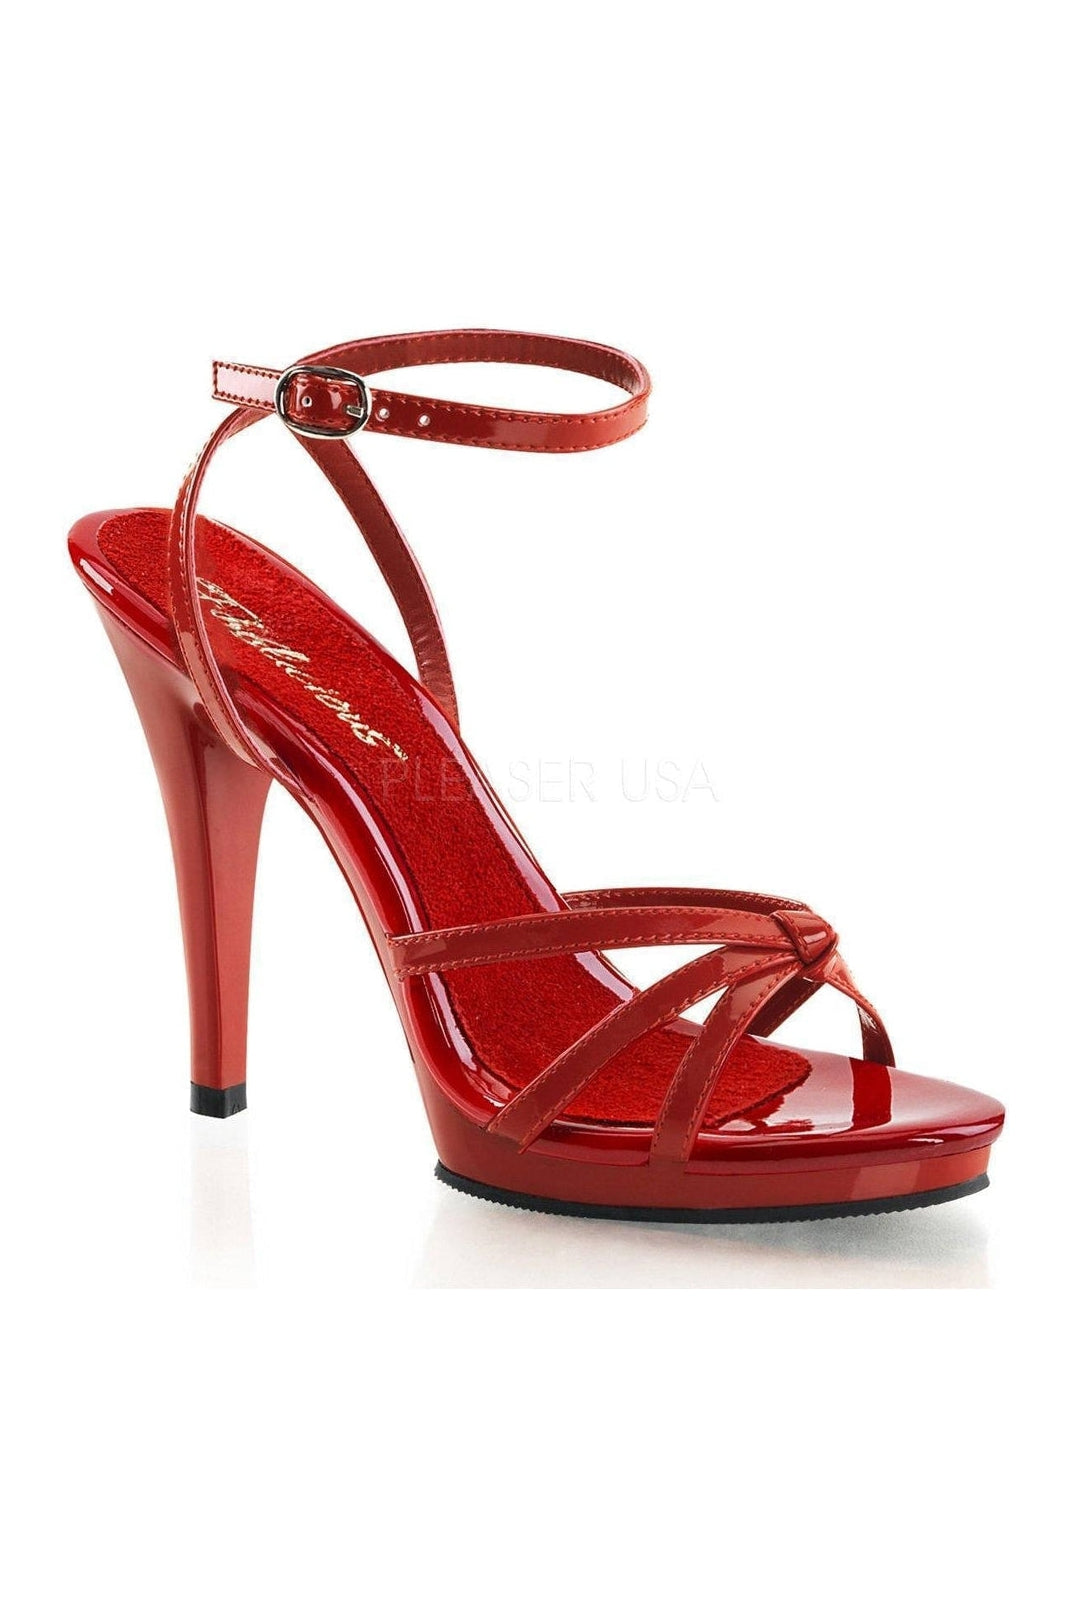 FLAIR-436 Sandal | Red Patent-Fabulicious-Red-Sandals-SEXYSHOES.COM